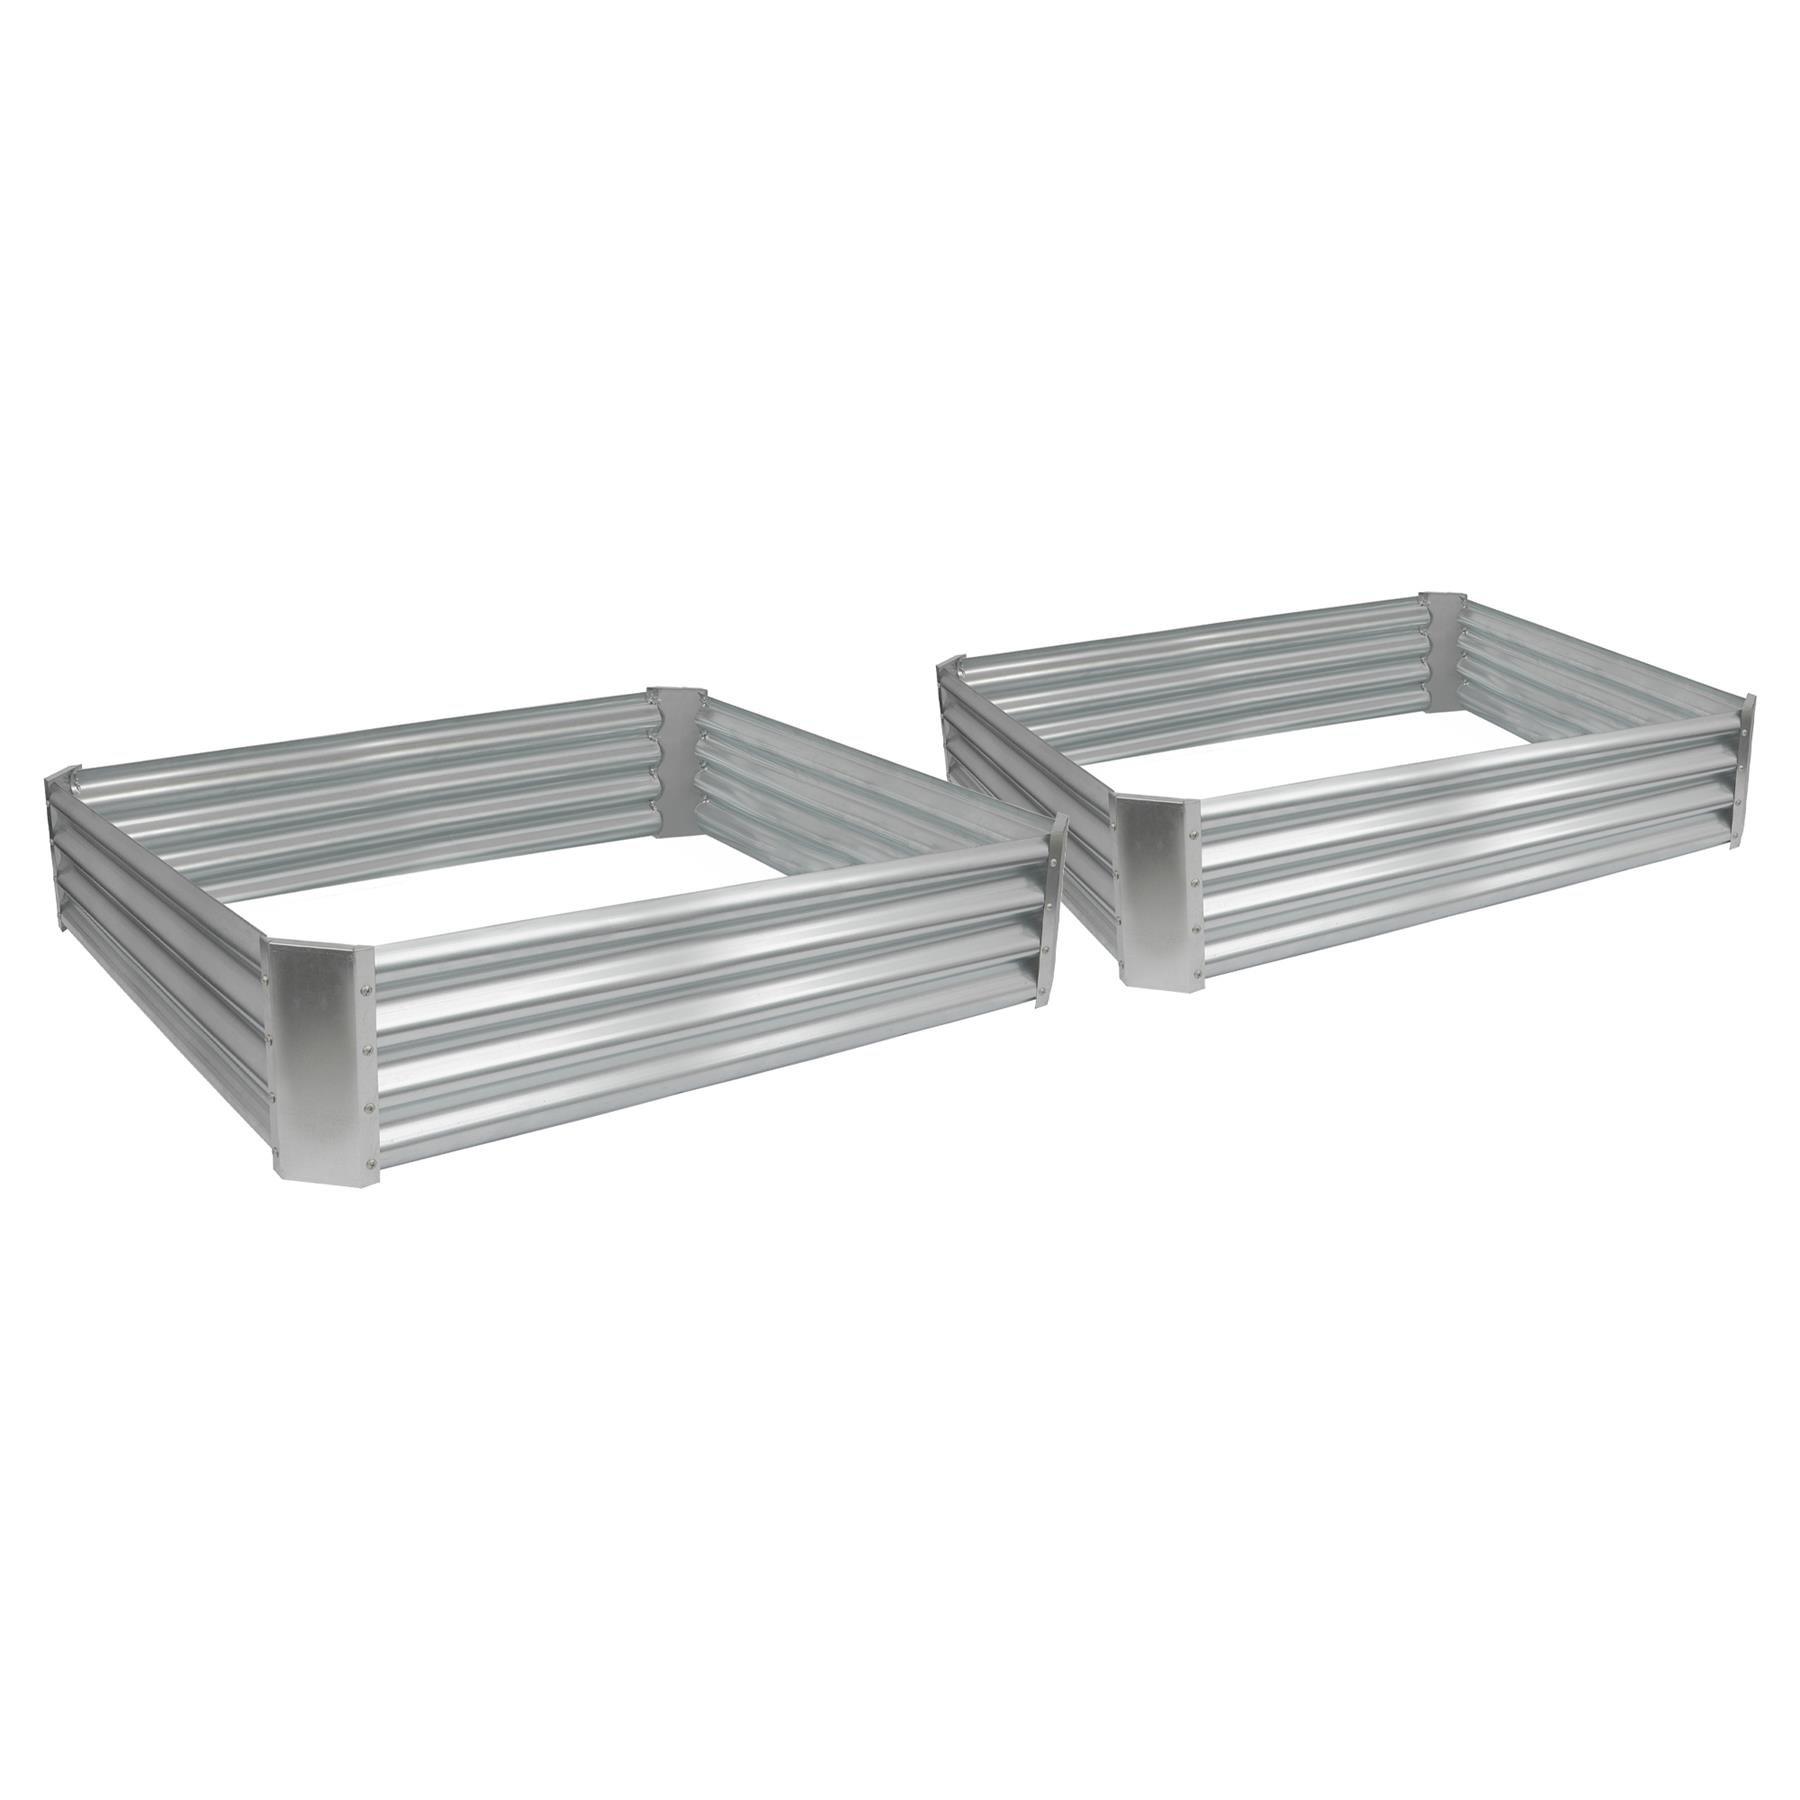 Square Galvanised Steel Raised Garden Beds - 120cm x 120cm - Silver - Pack of 2